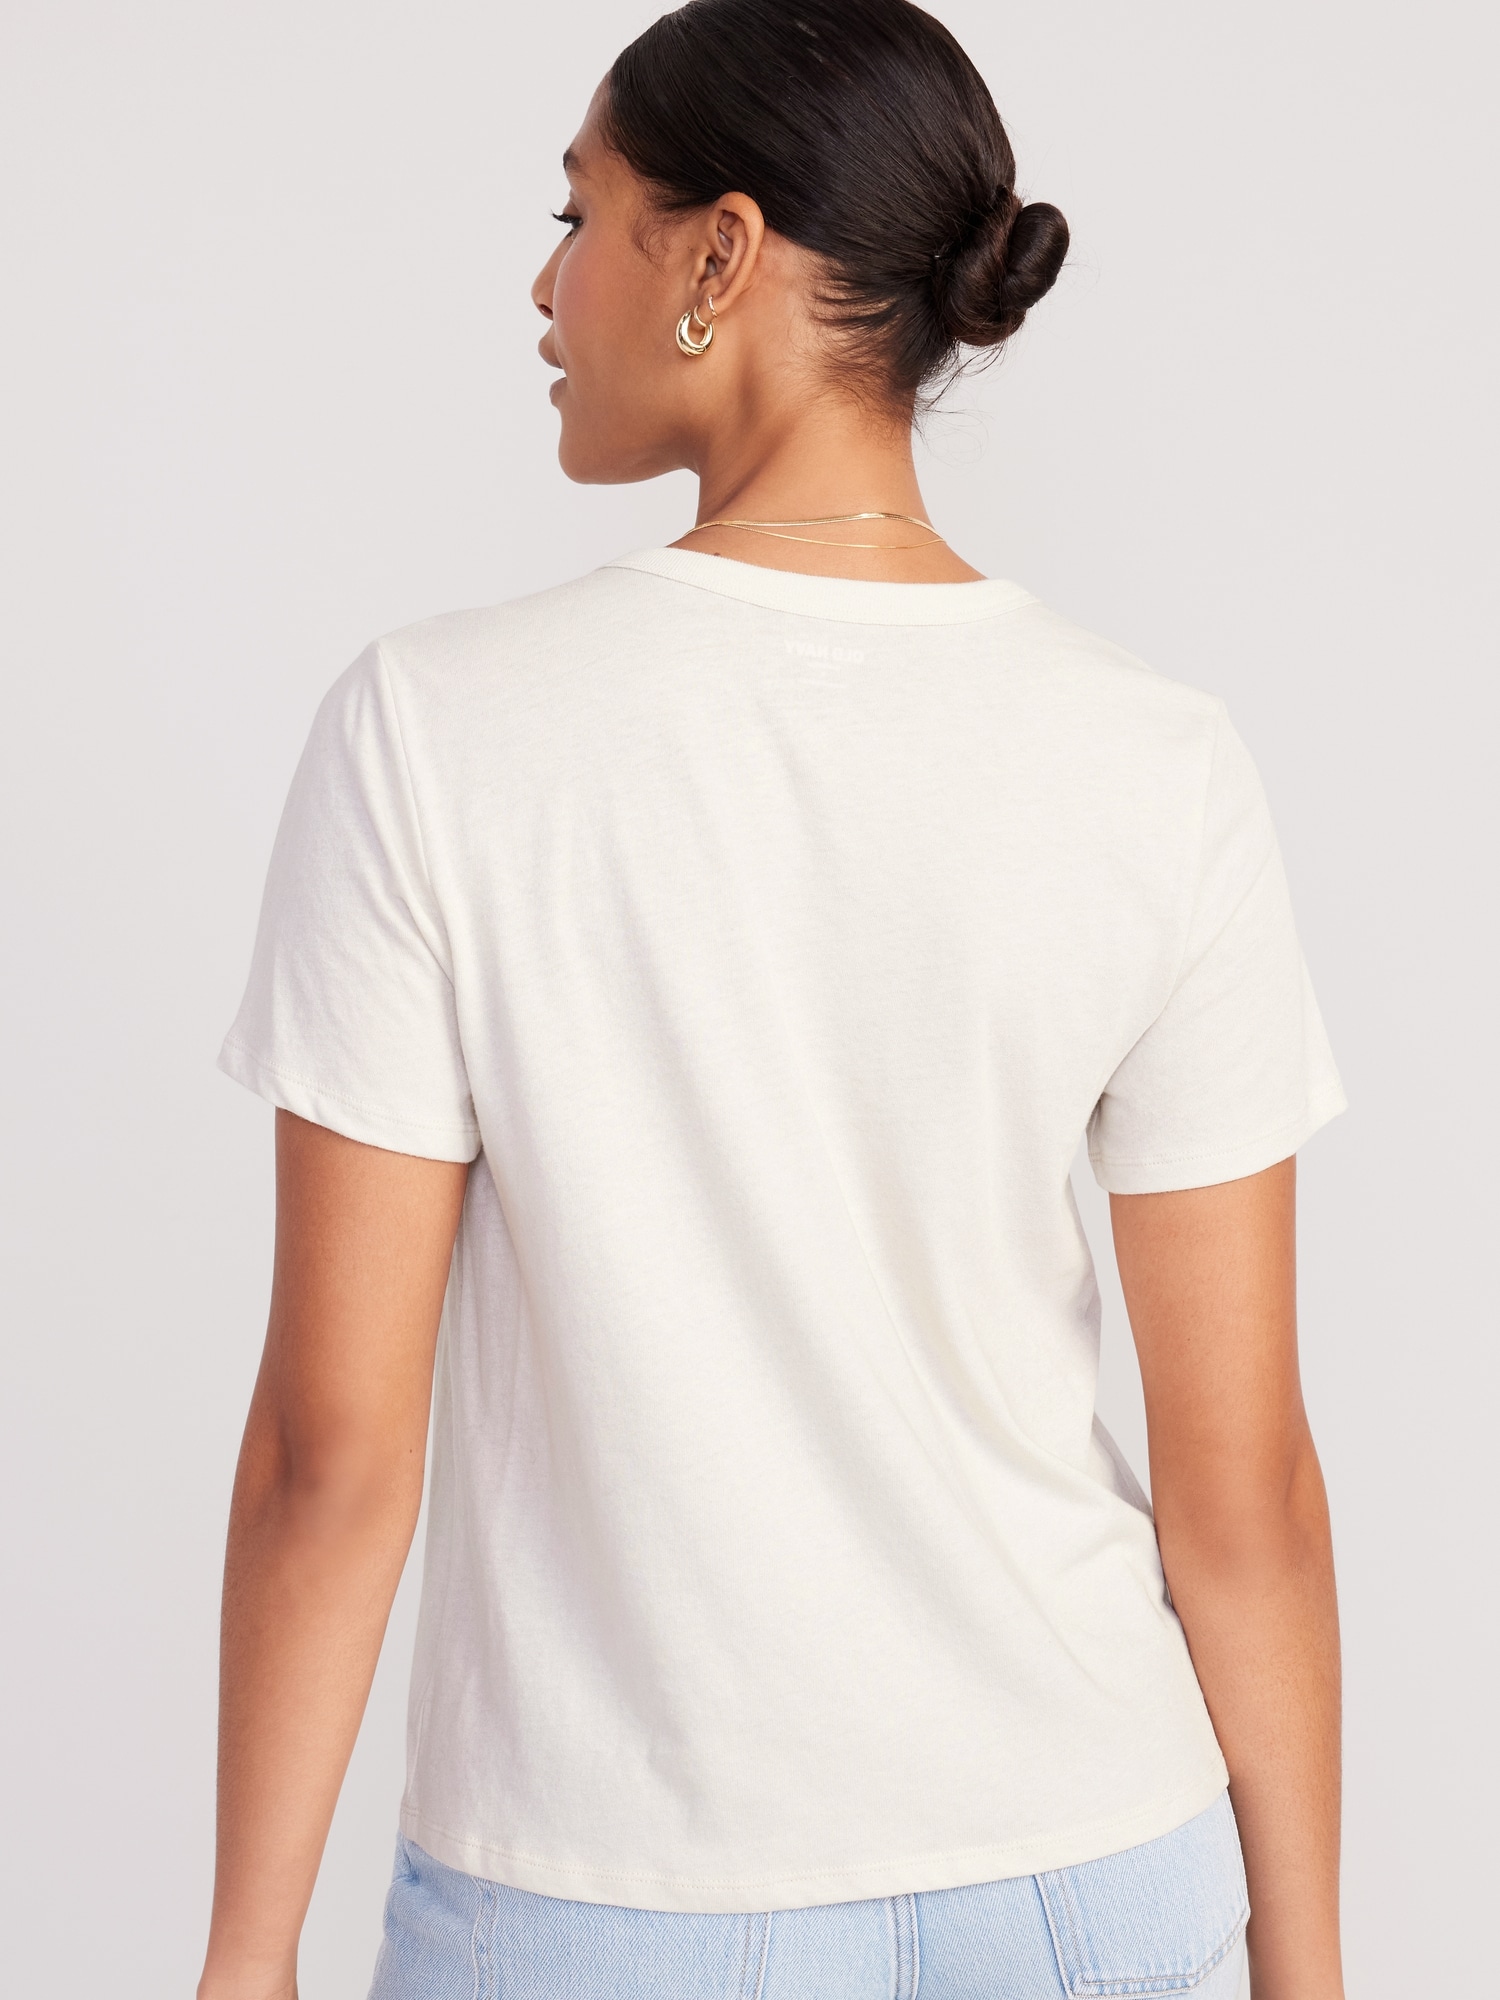 white t shirt women front and back